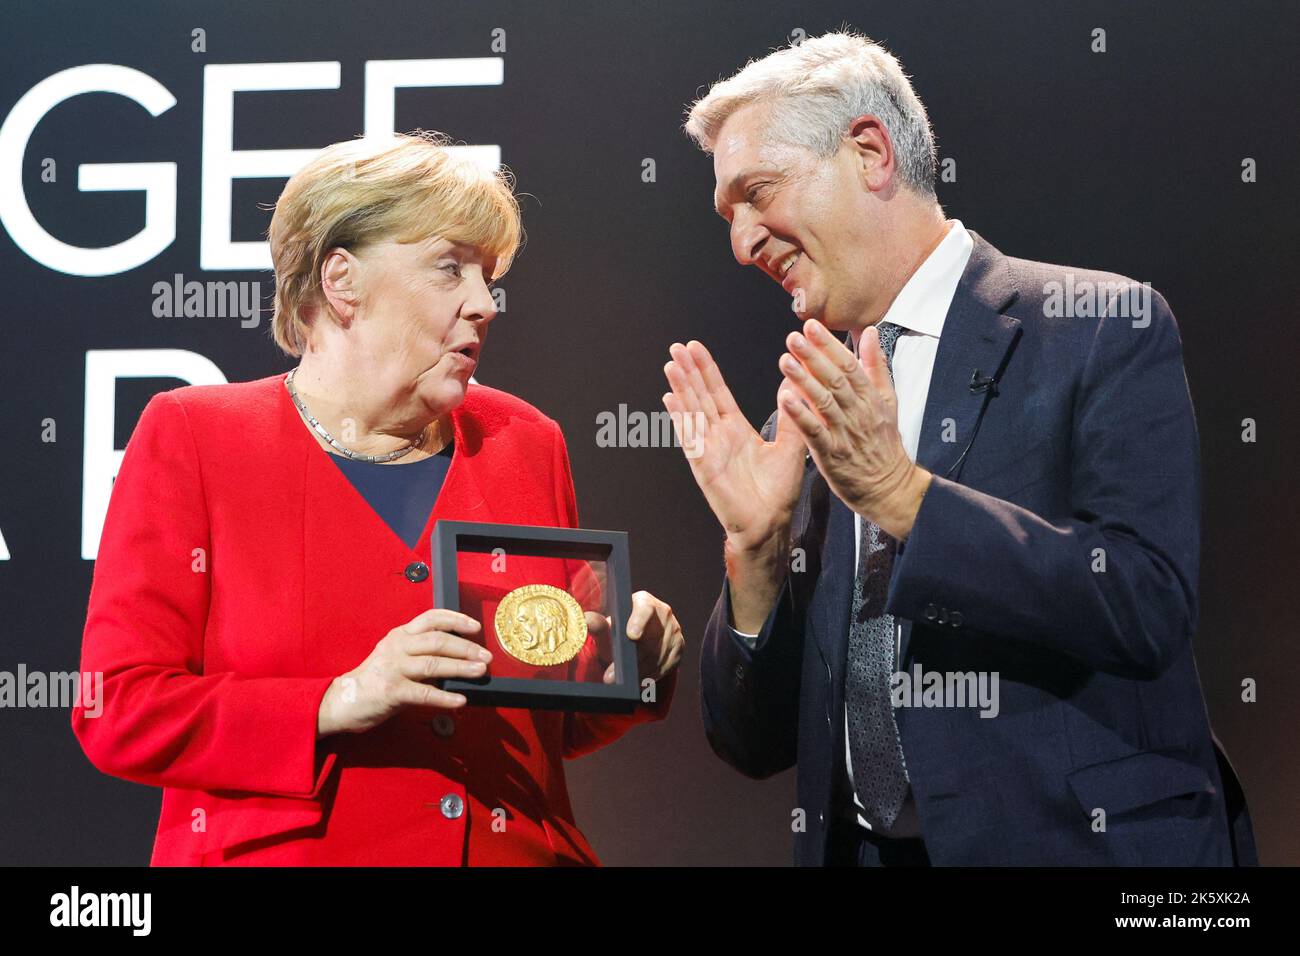 Angela Merkel receives the UNHCR Nansen Refugee Award for protecting refugees at height of Syria crisis, from United Nations High Commissioner for Refugees Filippo Grandi, during a ceremony in Geneva, Switzerland, October 10, 2022. REUTERS/Stefan Wermuth/Pool Stock Photo